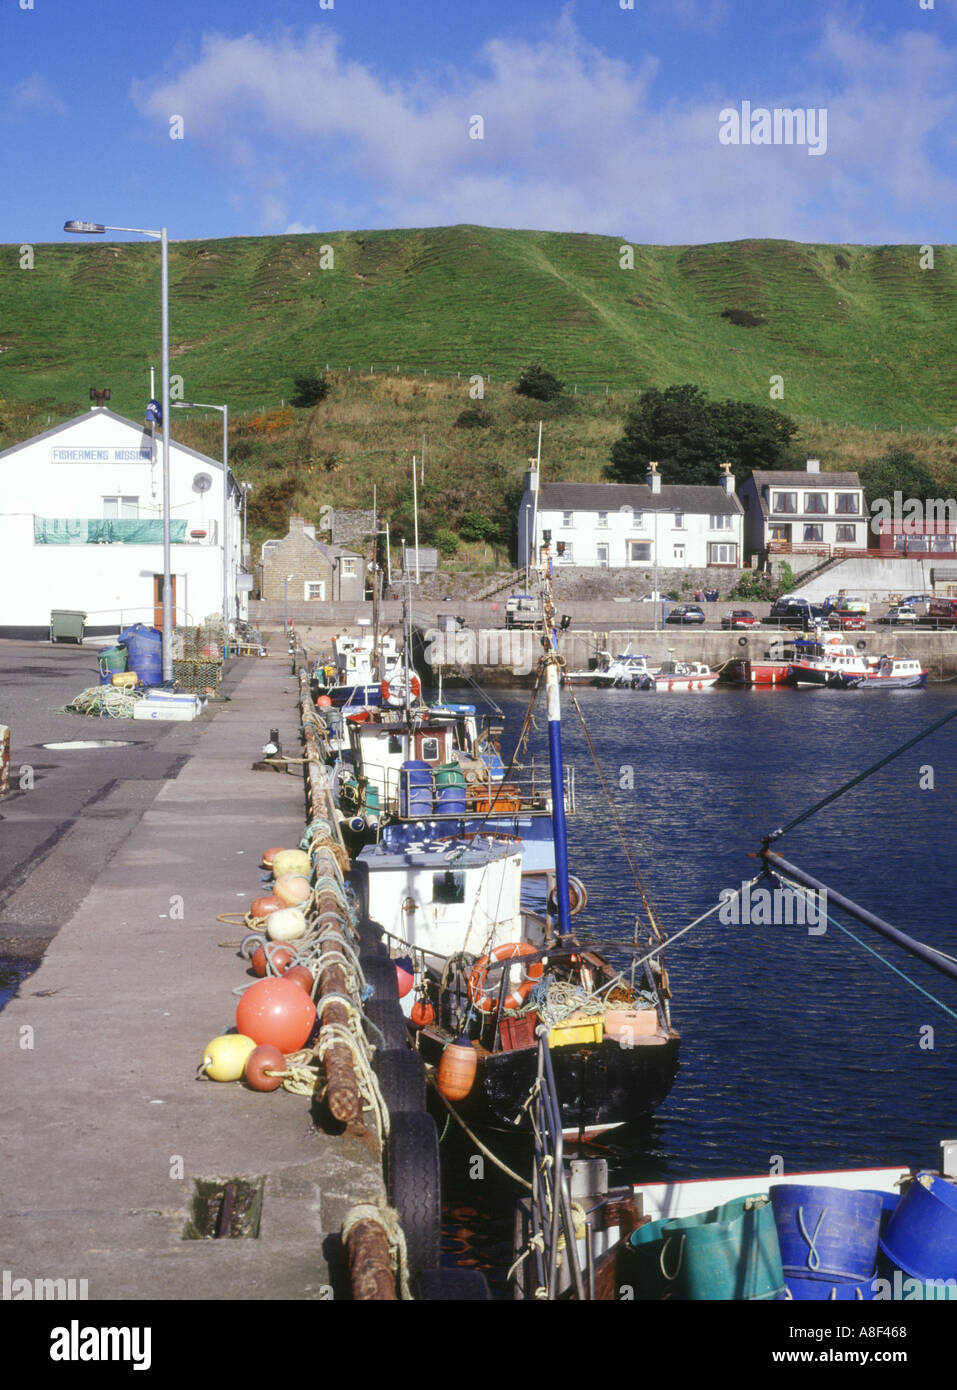 dh Coastal Scotland harbor SCRABSTER HARBOUR CAITHNESS Fishing boats at quayside in boat coast Stock Photo